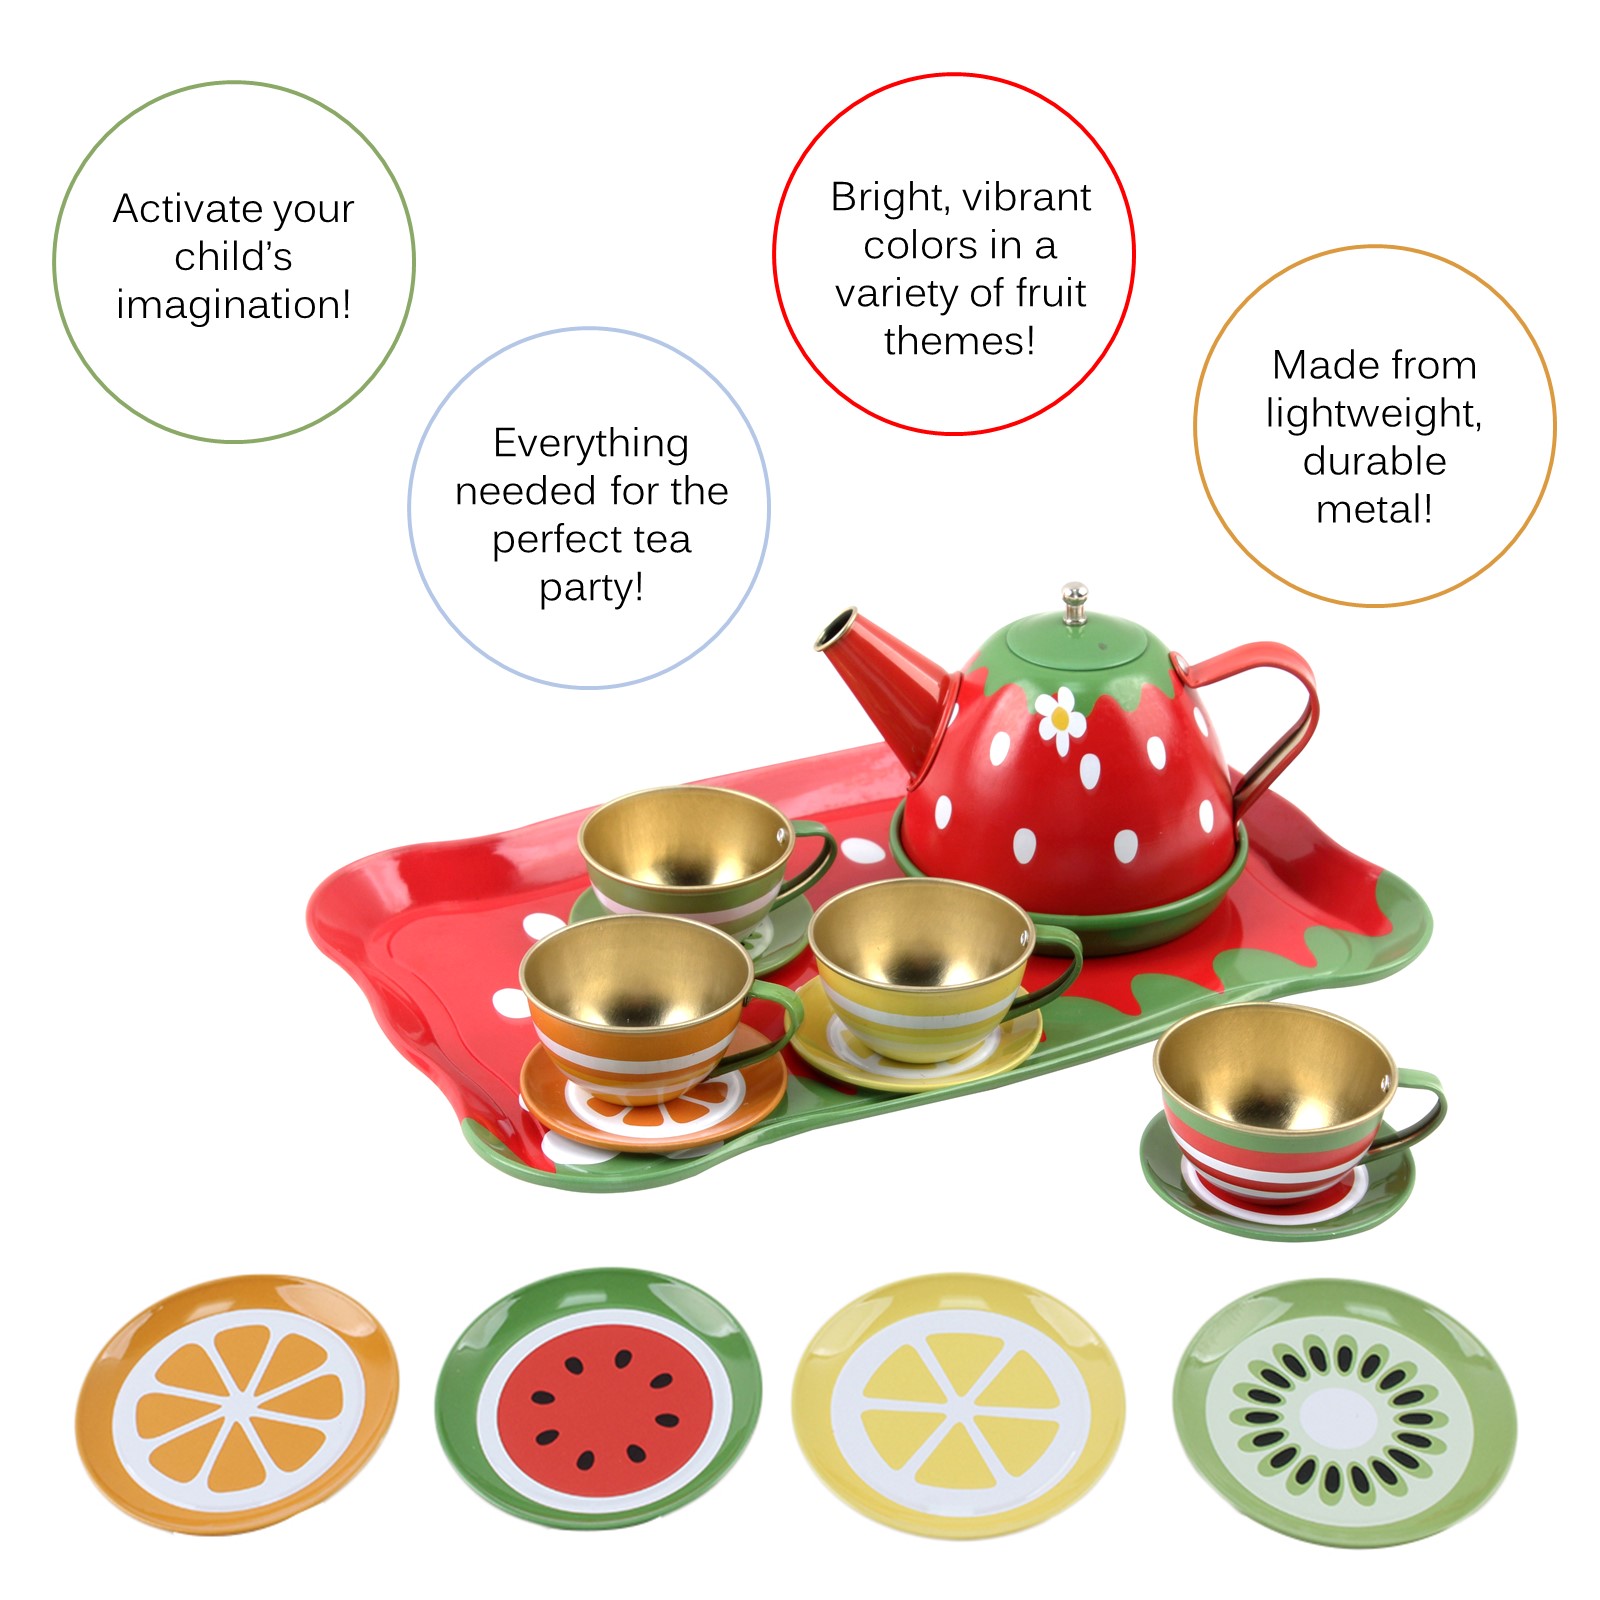 Vokodo Kids Fruit Themed Pretend Play Tea Set 14 Piece Durably Built From Food-Safe Material BPA-Free Kitchen Playset Perfect Early Learning Preschool Toy Great Gift For Children Girls Boys Toddlers TK-15